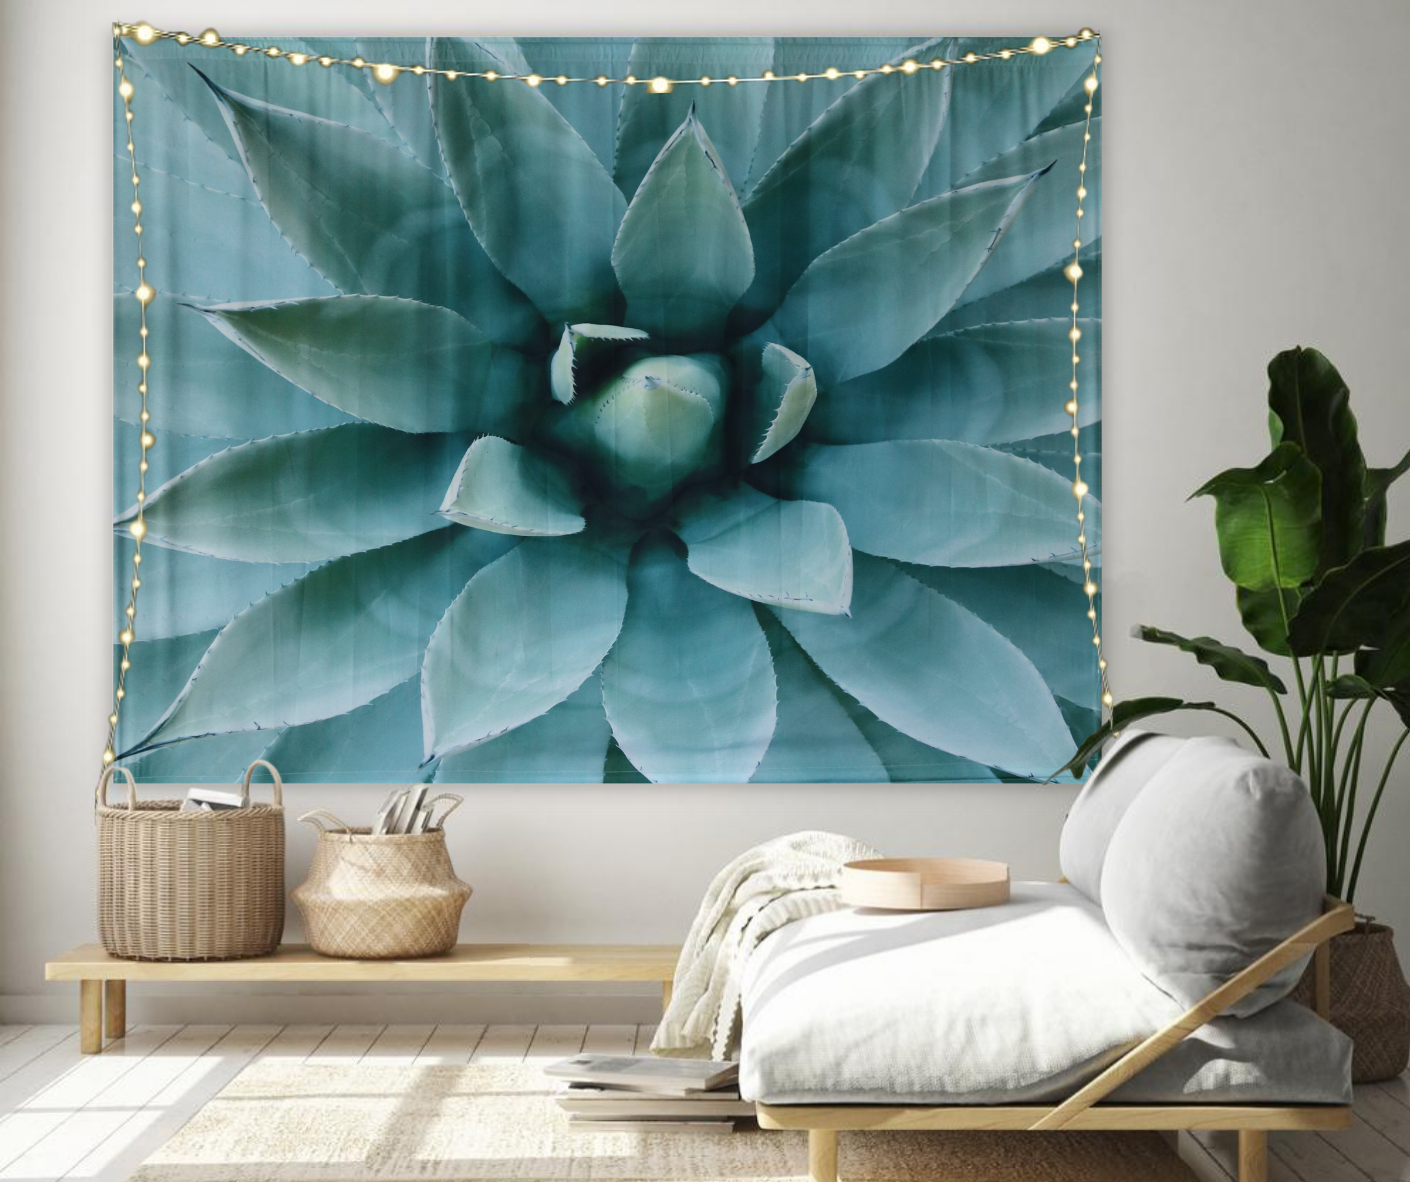 KaiSha LED Tapestry Wall Hanging; Bohemian Floral Wall Hanging Art Décor Large Boho Teal Flower Artwork (79"x59")